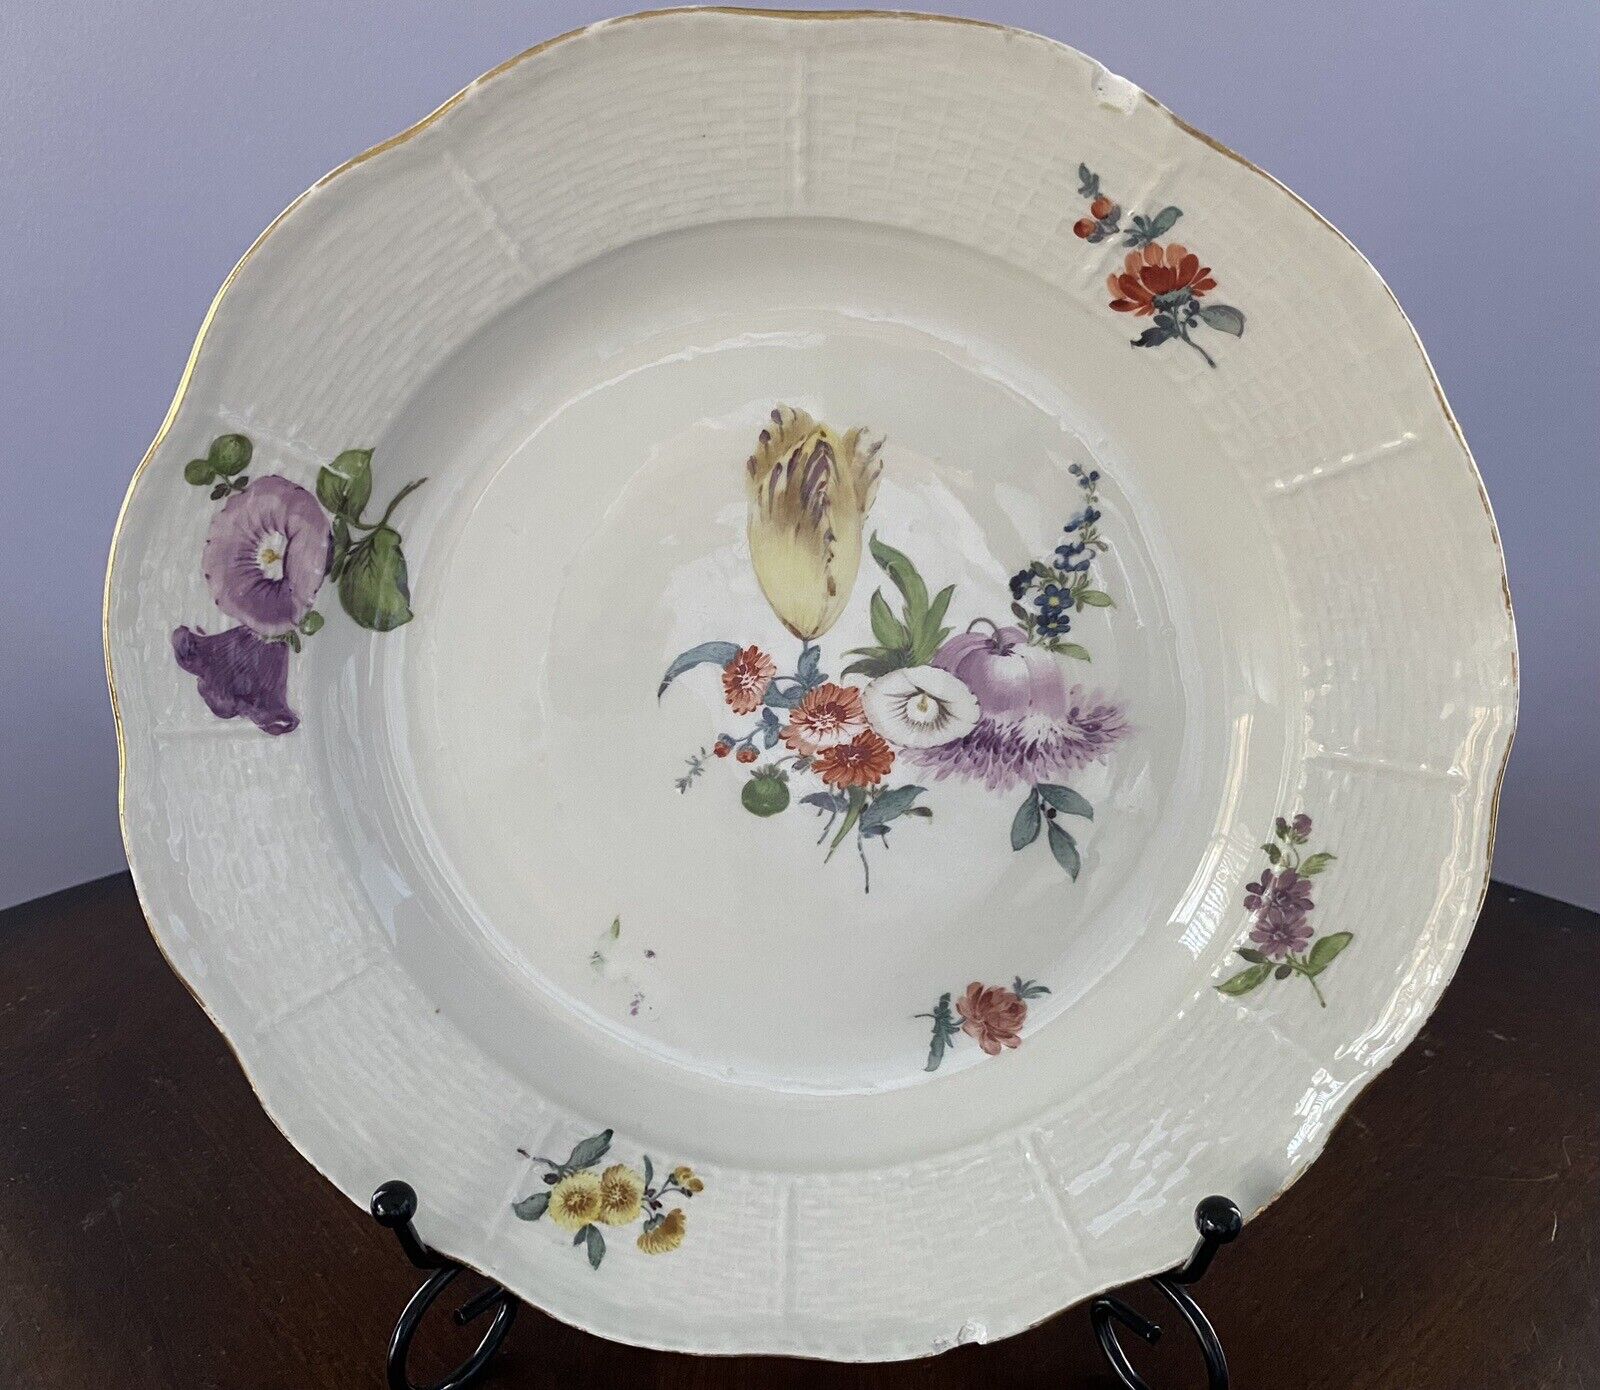 Antique Meissen Hand-Painted Floral Plate, Approx. Mid 18th Century